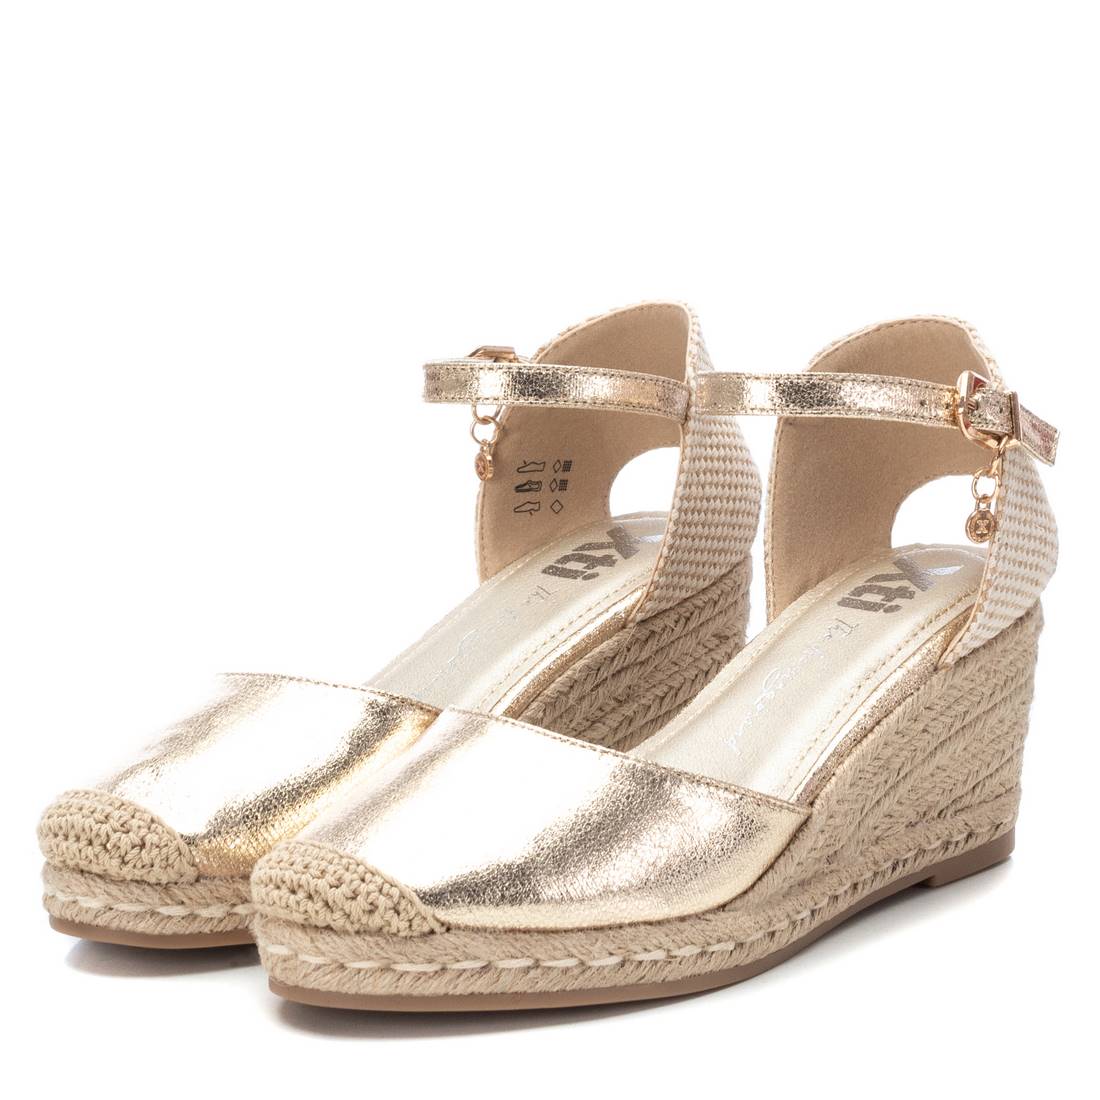 XTI Metallic Gold Vegan Espadrille Wedges with Ankle Strap